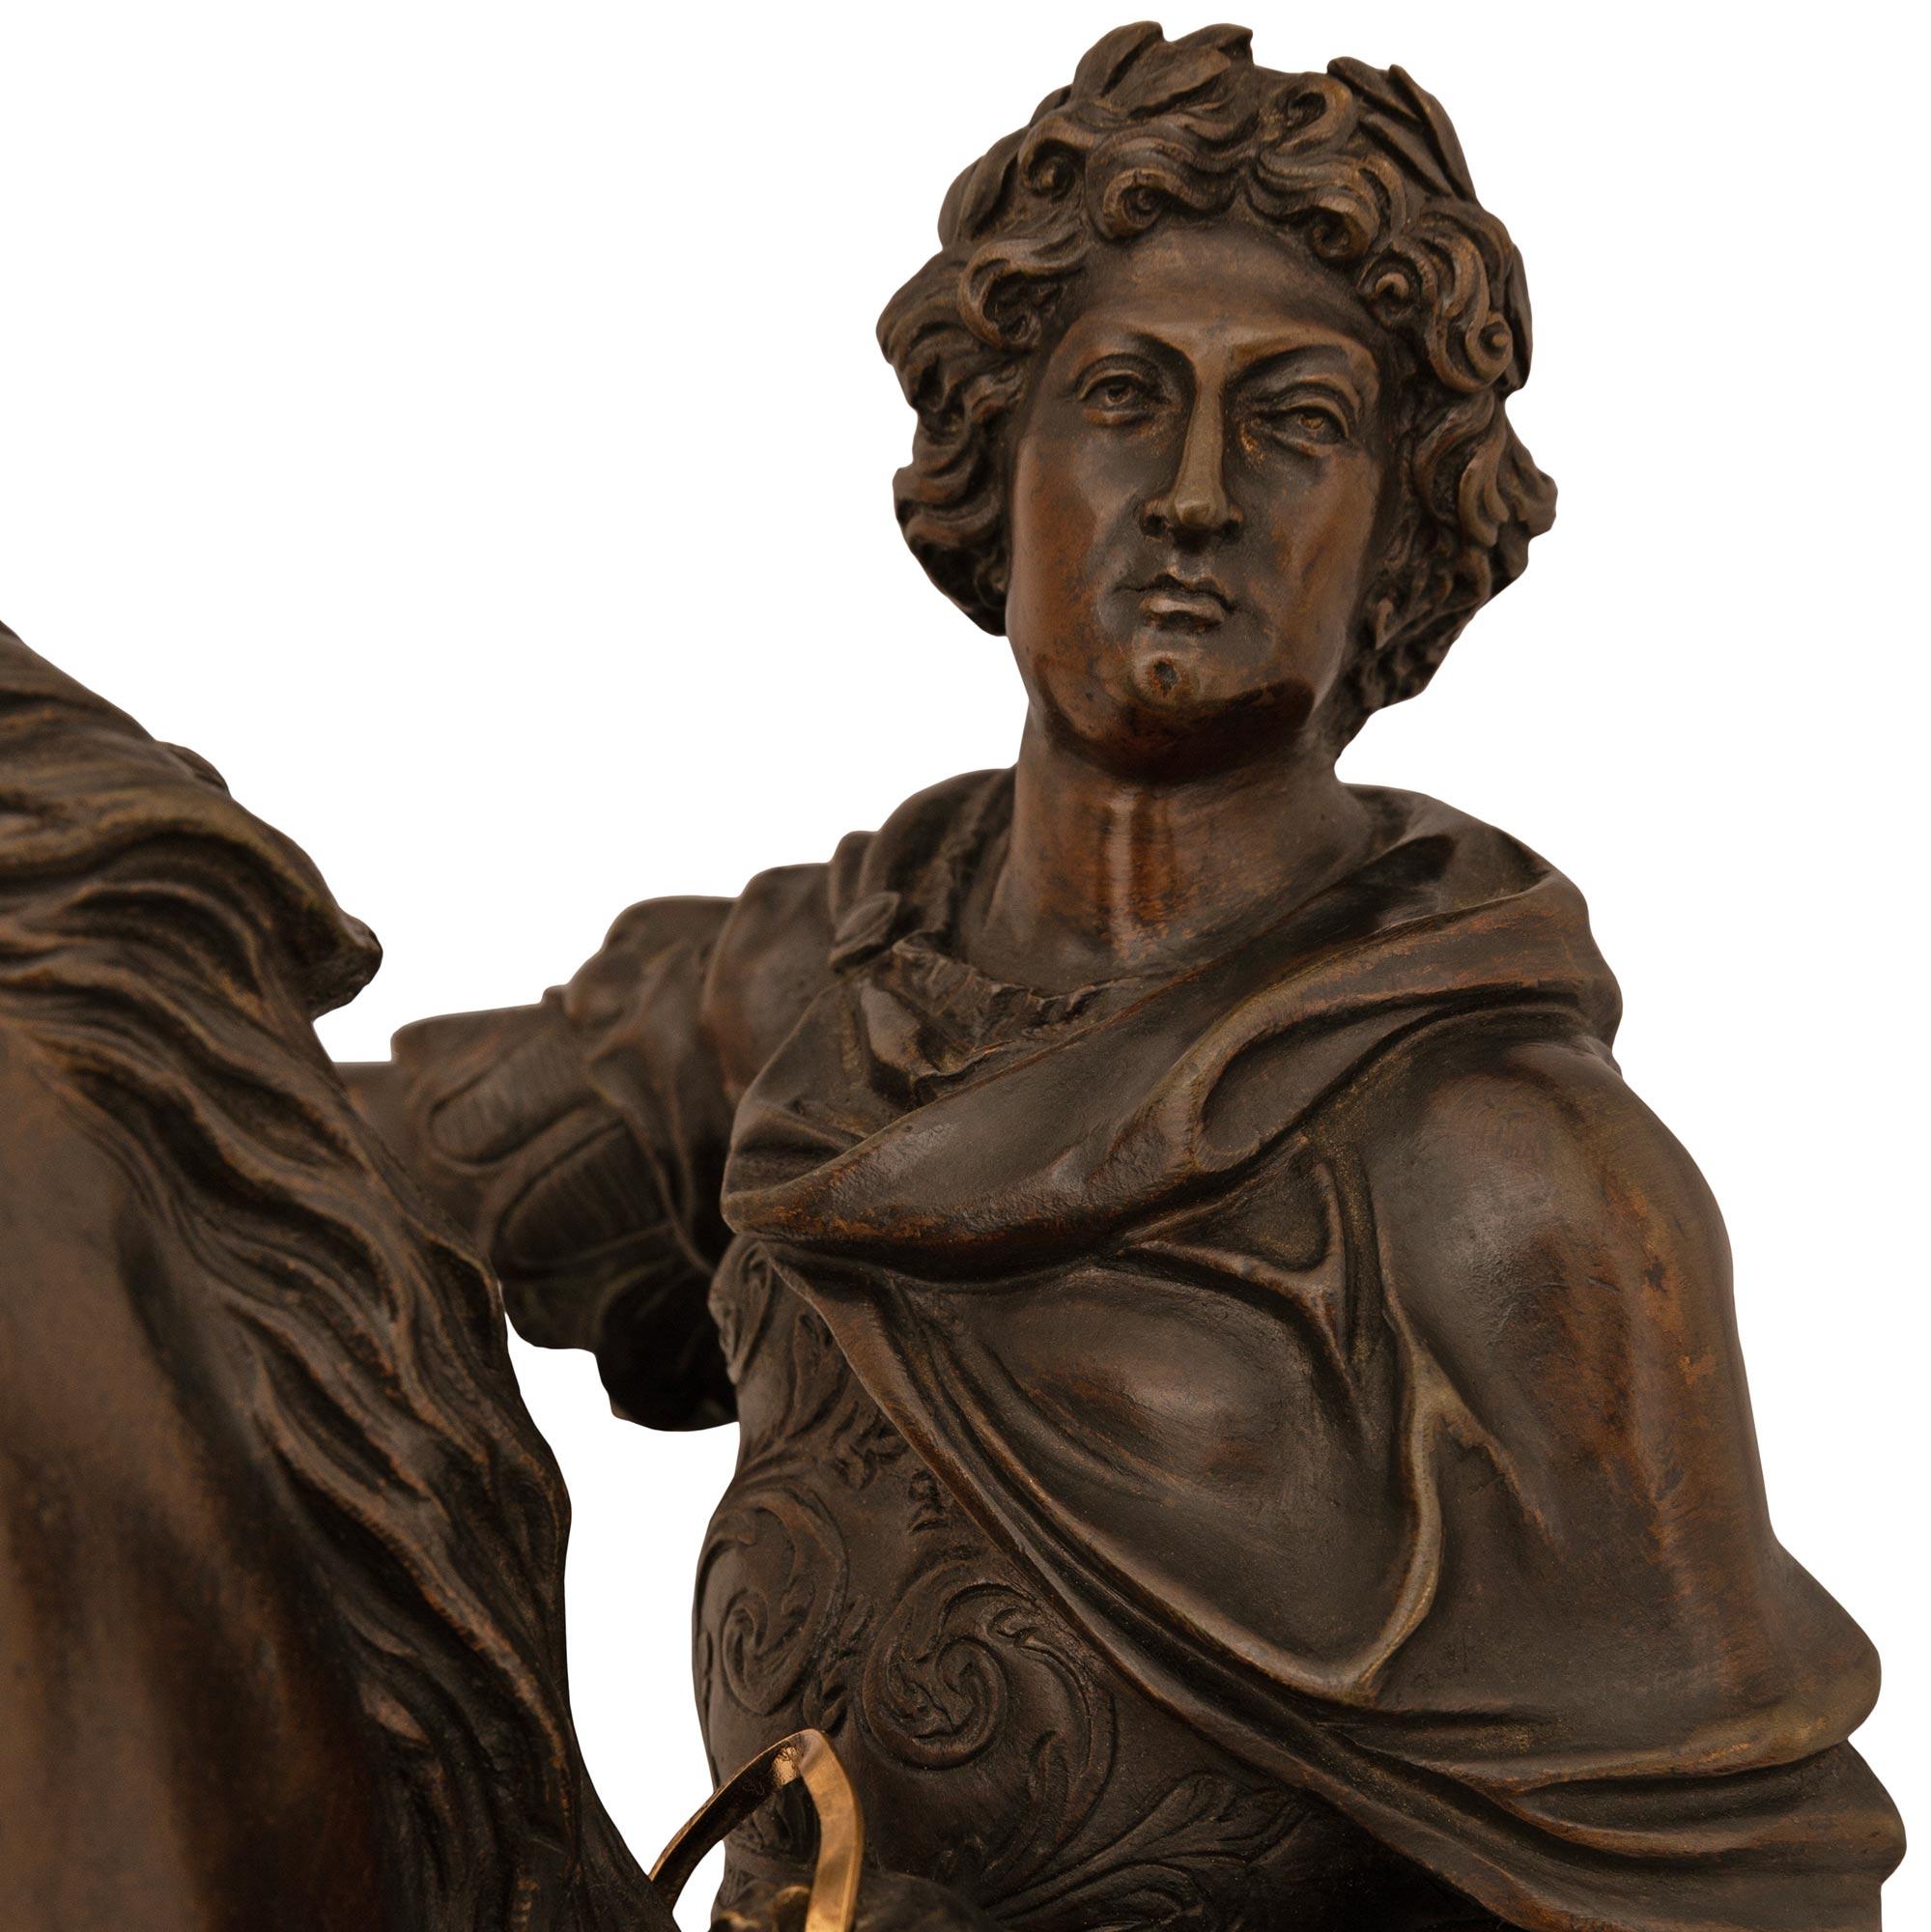 A handsome and most impressive French 19th century Louis XIV st. patinated Bronze, Ormolu, and Boulle statue of King Louis XIV. This wonderful statue is modeled after the statue of Louis XIV in the middle of the Place des Victoires, Paris. The